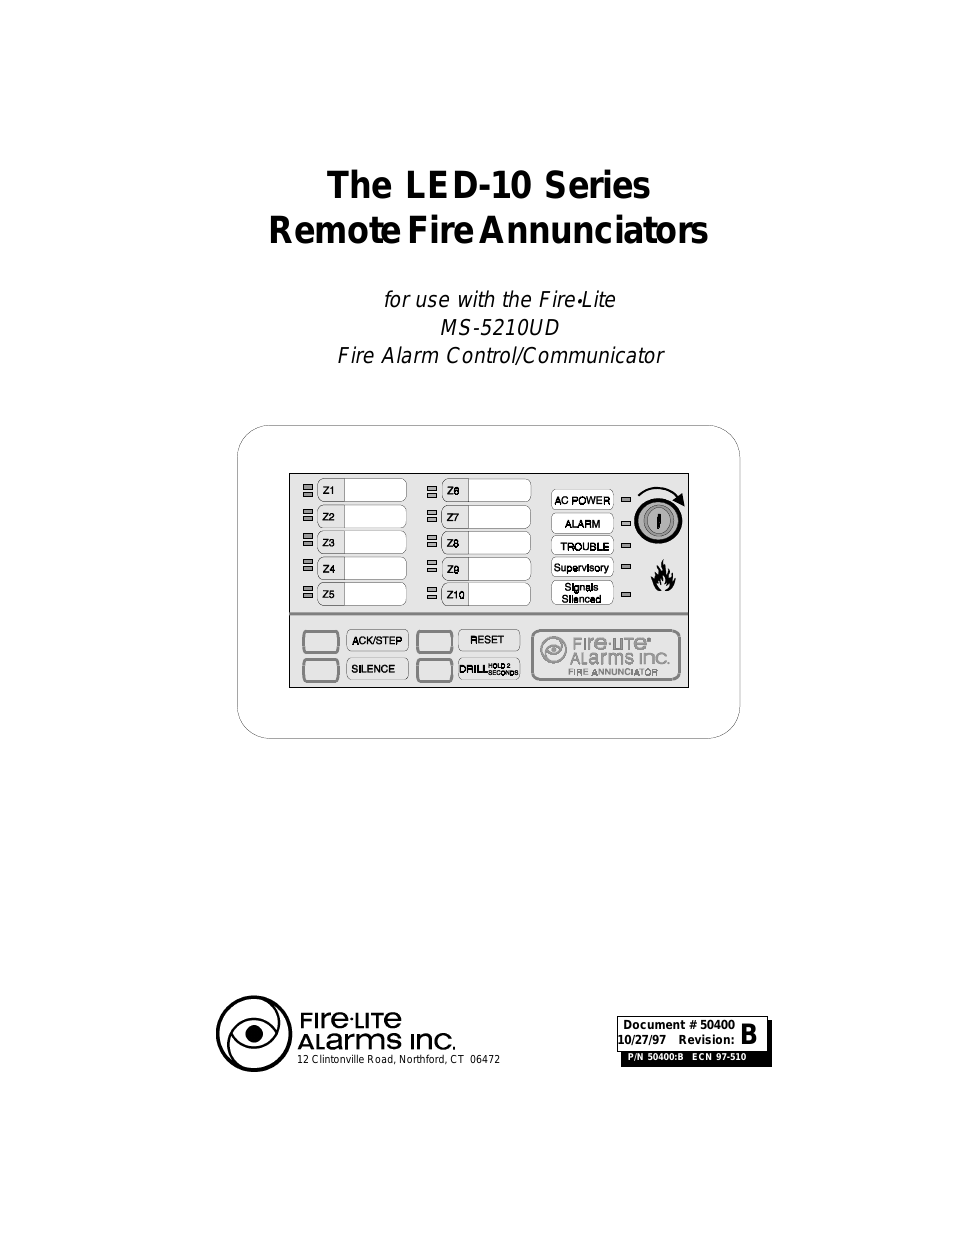 LED-10 Series Remote Fire Annunciator